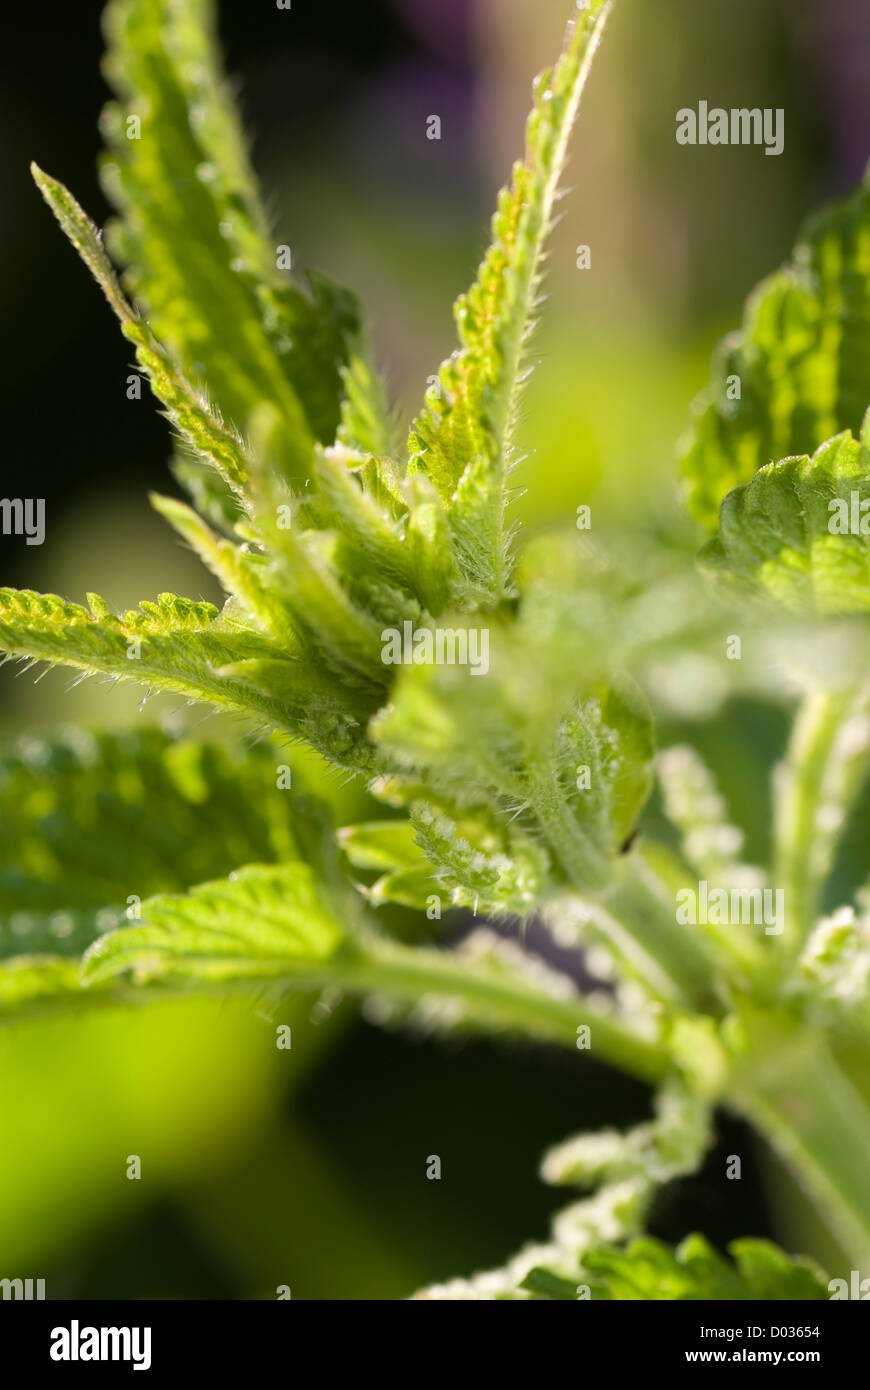 stem nettle with stinging thorn Stock Photo